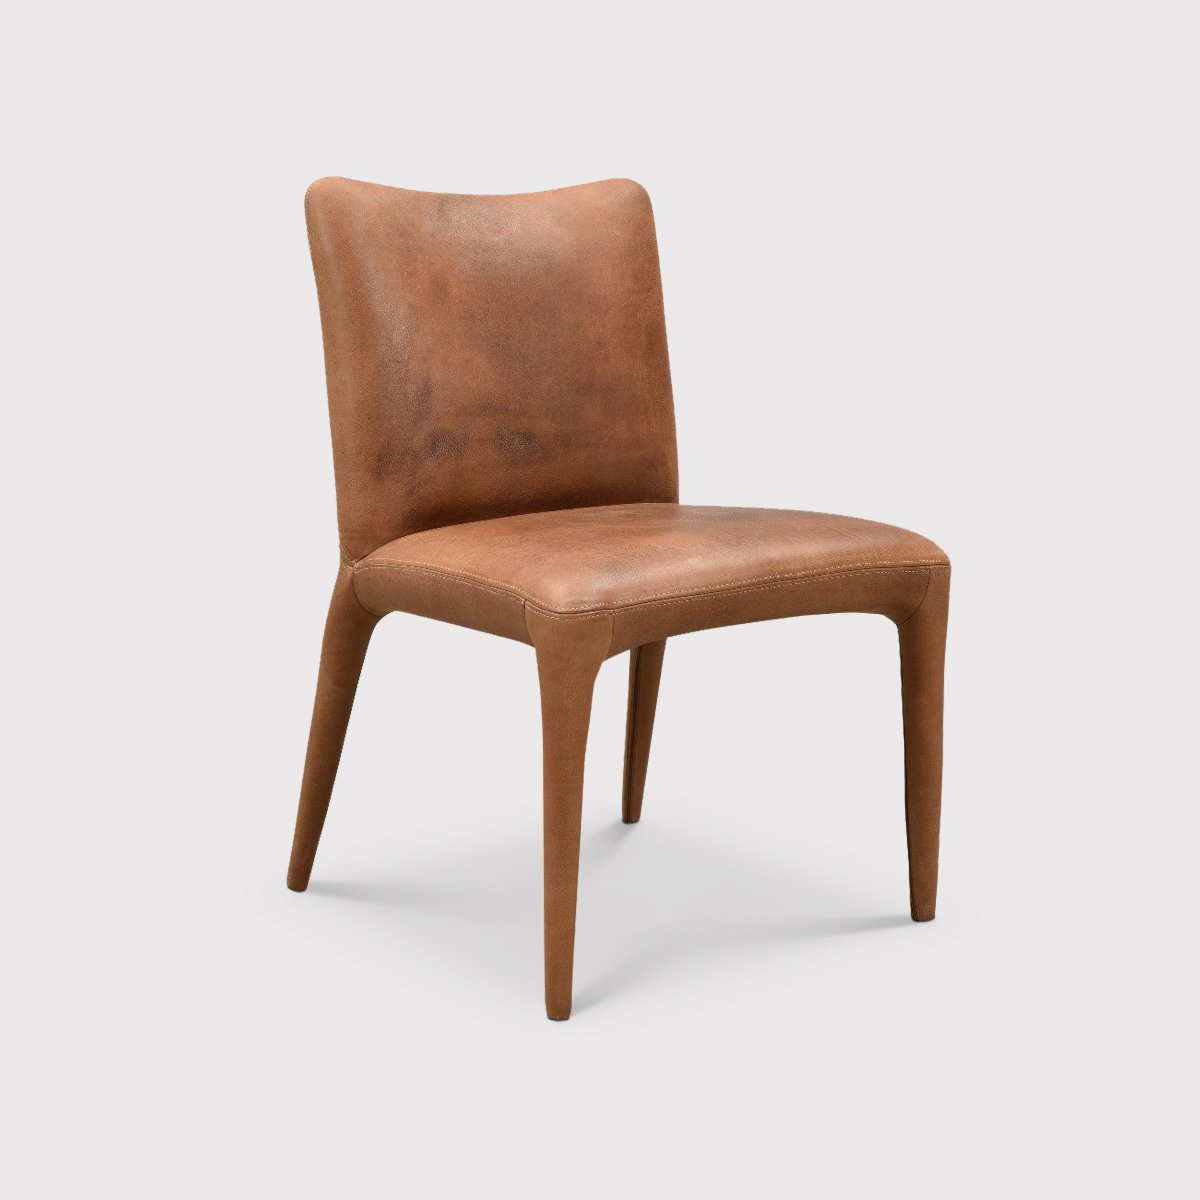 Timothy Oulton Fibi Dining Chair, Brown | Barker & Stonehouse